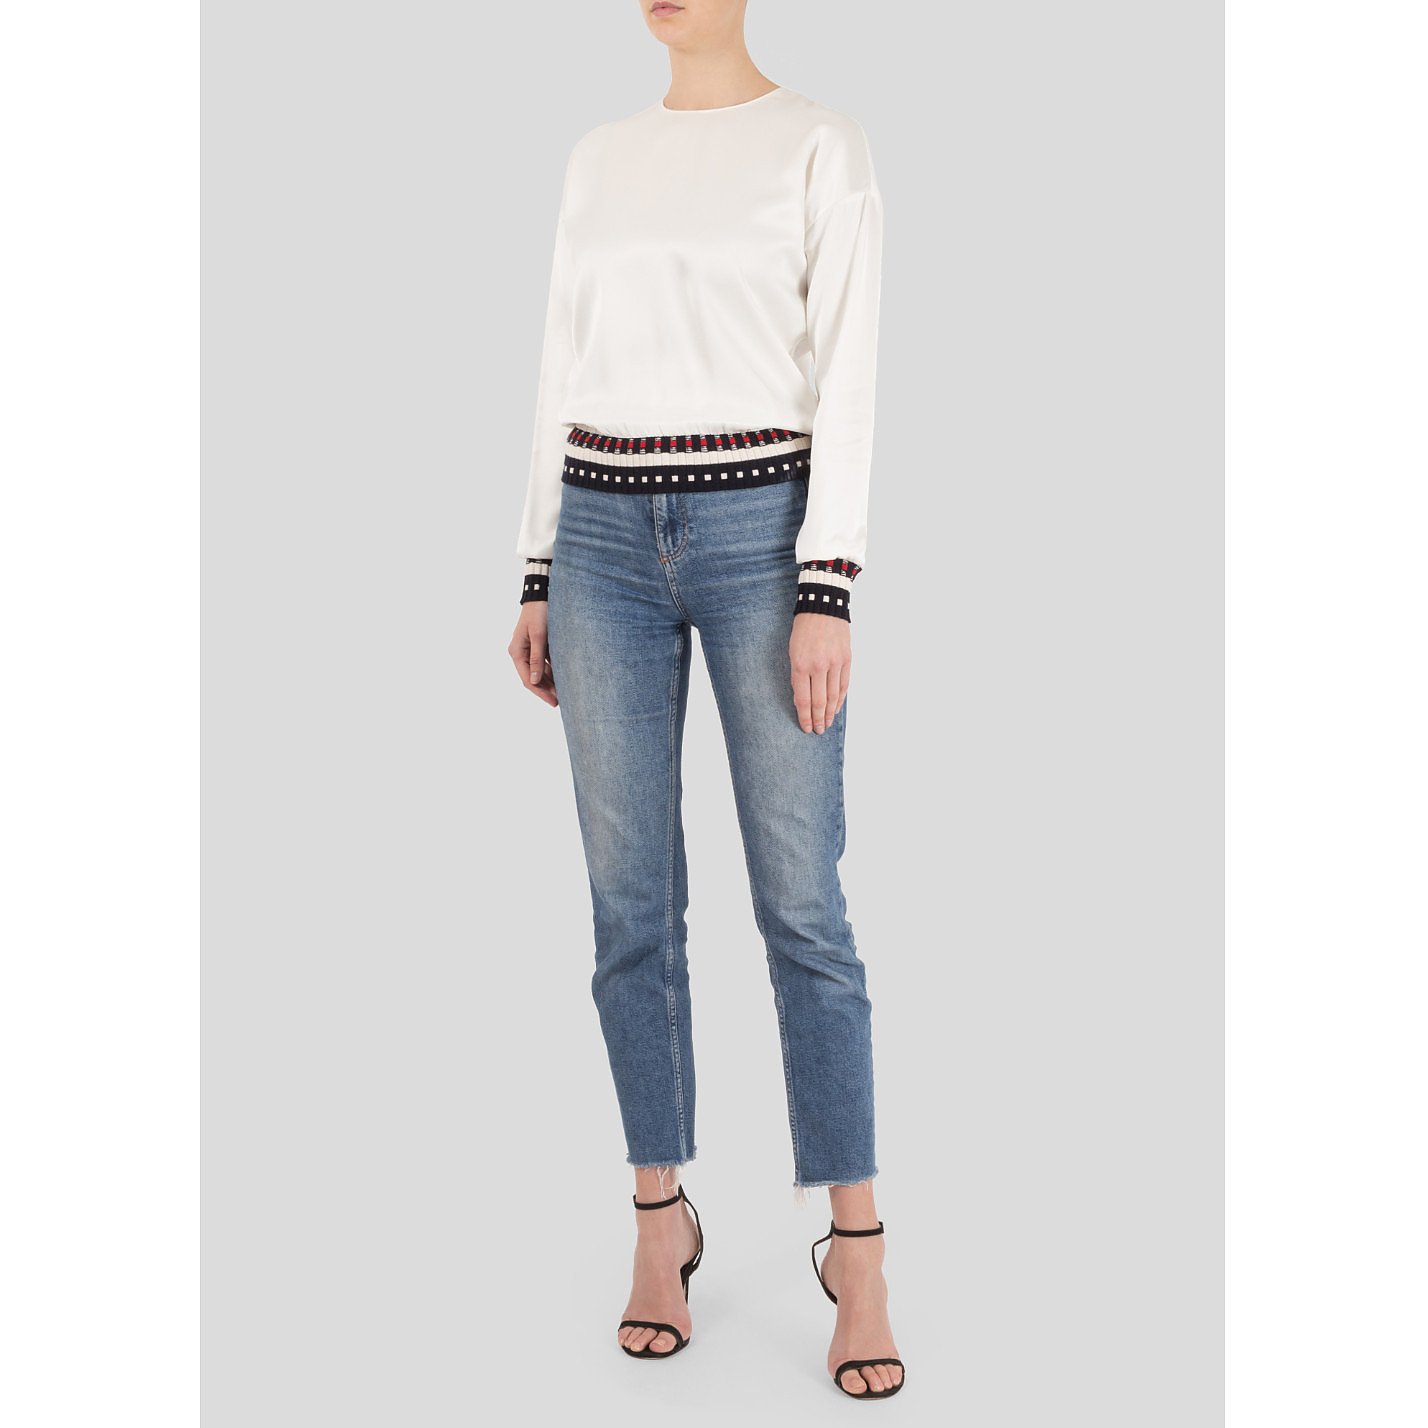 Victoria Beckham Top With Knitted Hem